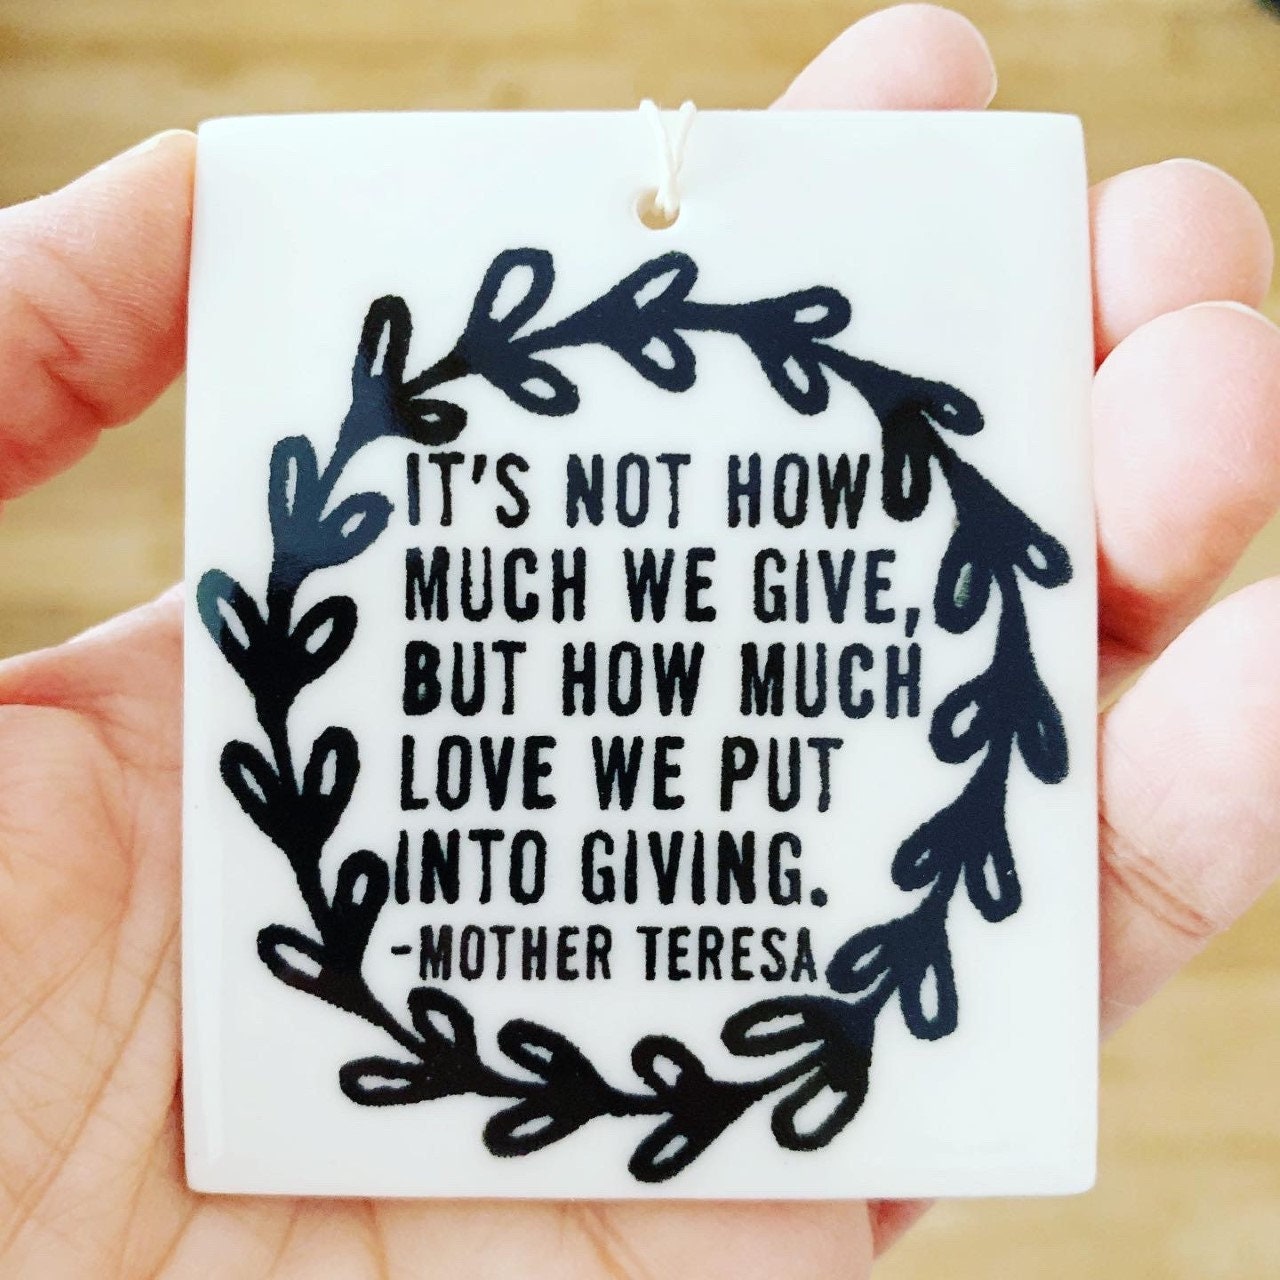 porcelain wall tag screenprinted text it's not how much we give, but how much love we put into giving. -mother teresa